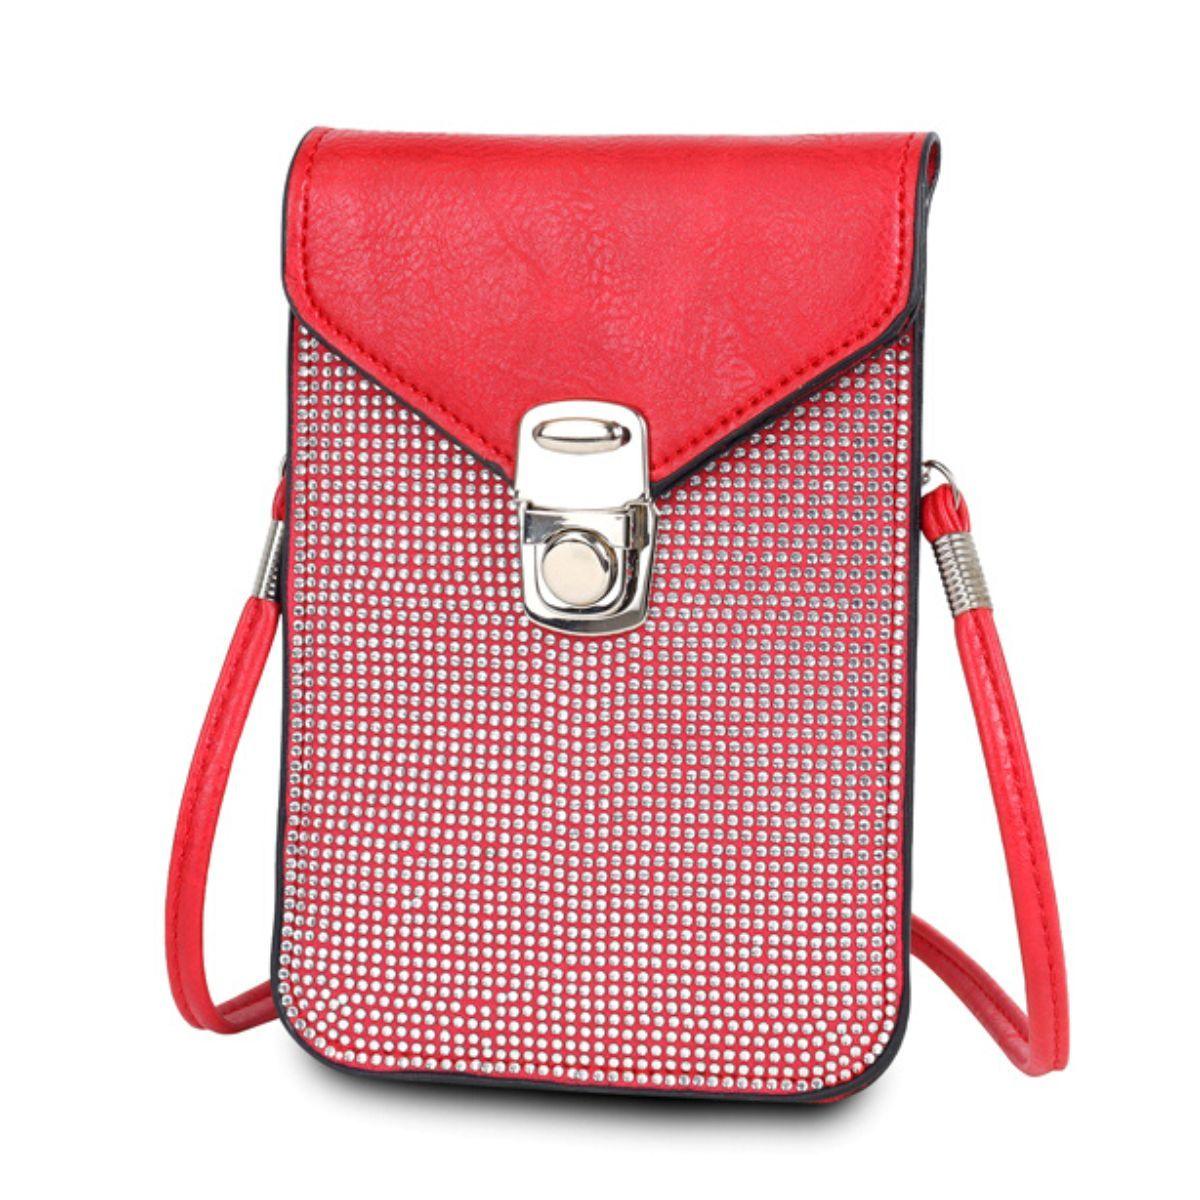 Red Crossbody Cellular Phone Bag with Card Slots for Women